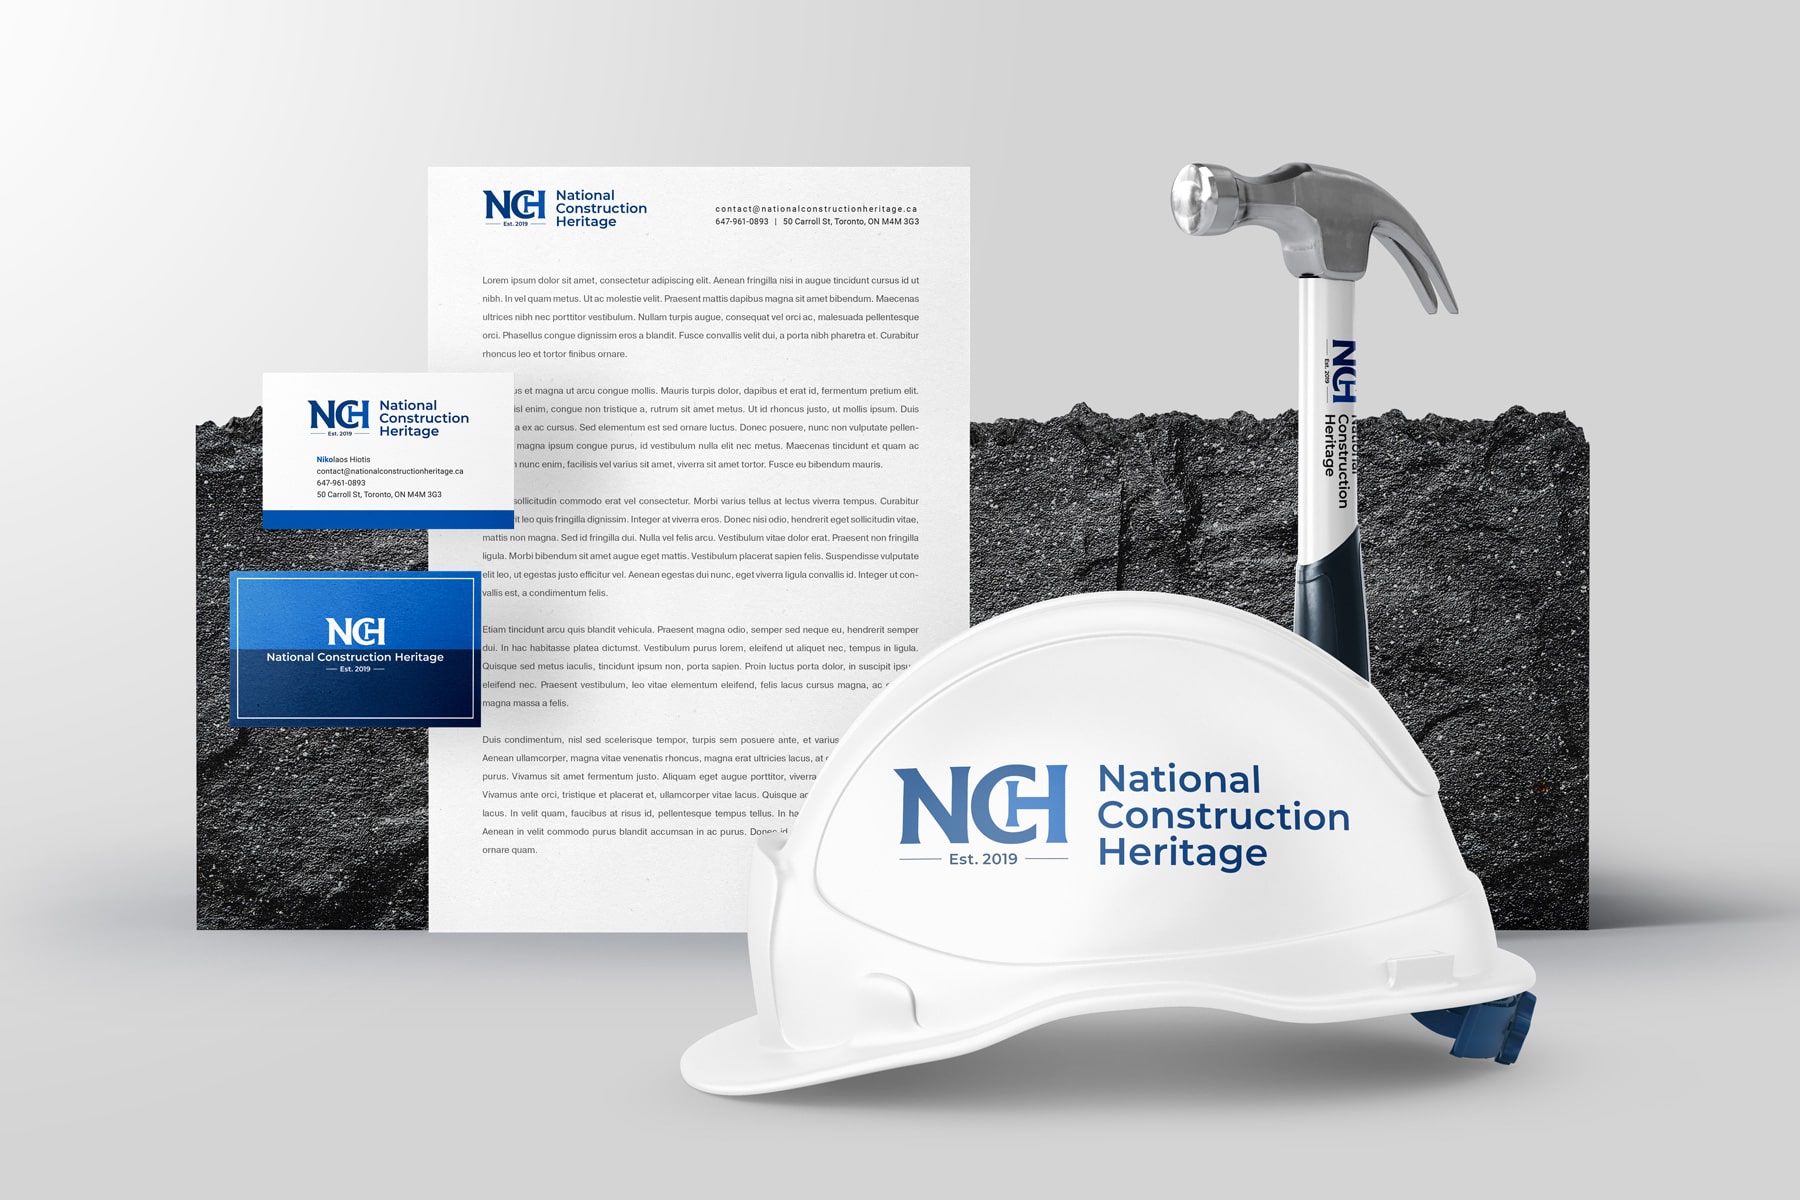 Professional branding materials for National Construction Heritage, featuring a clean logo design on a white hard hat, letterhead, and business cards, exemplifying a polished logo design for building contractors established in 2019.